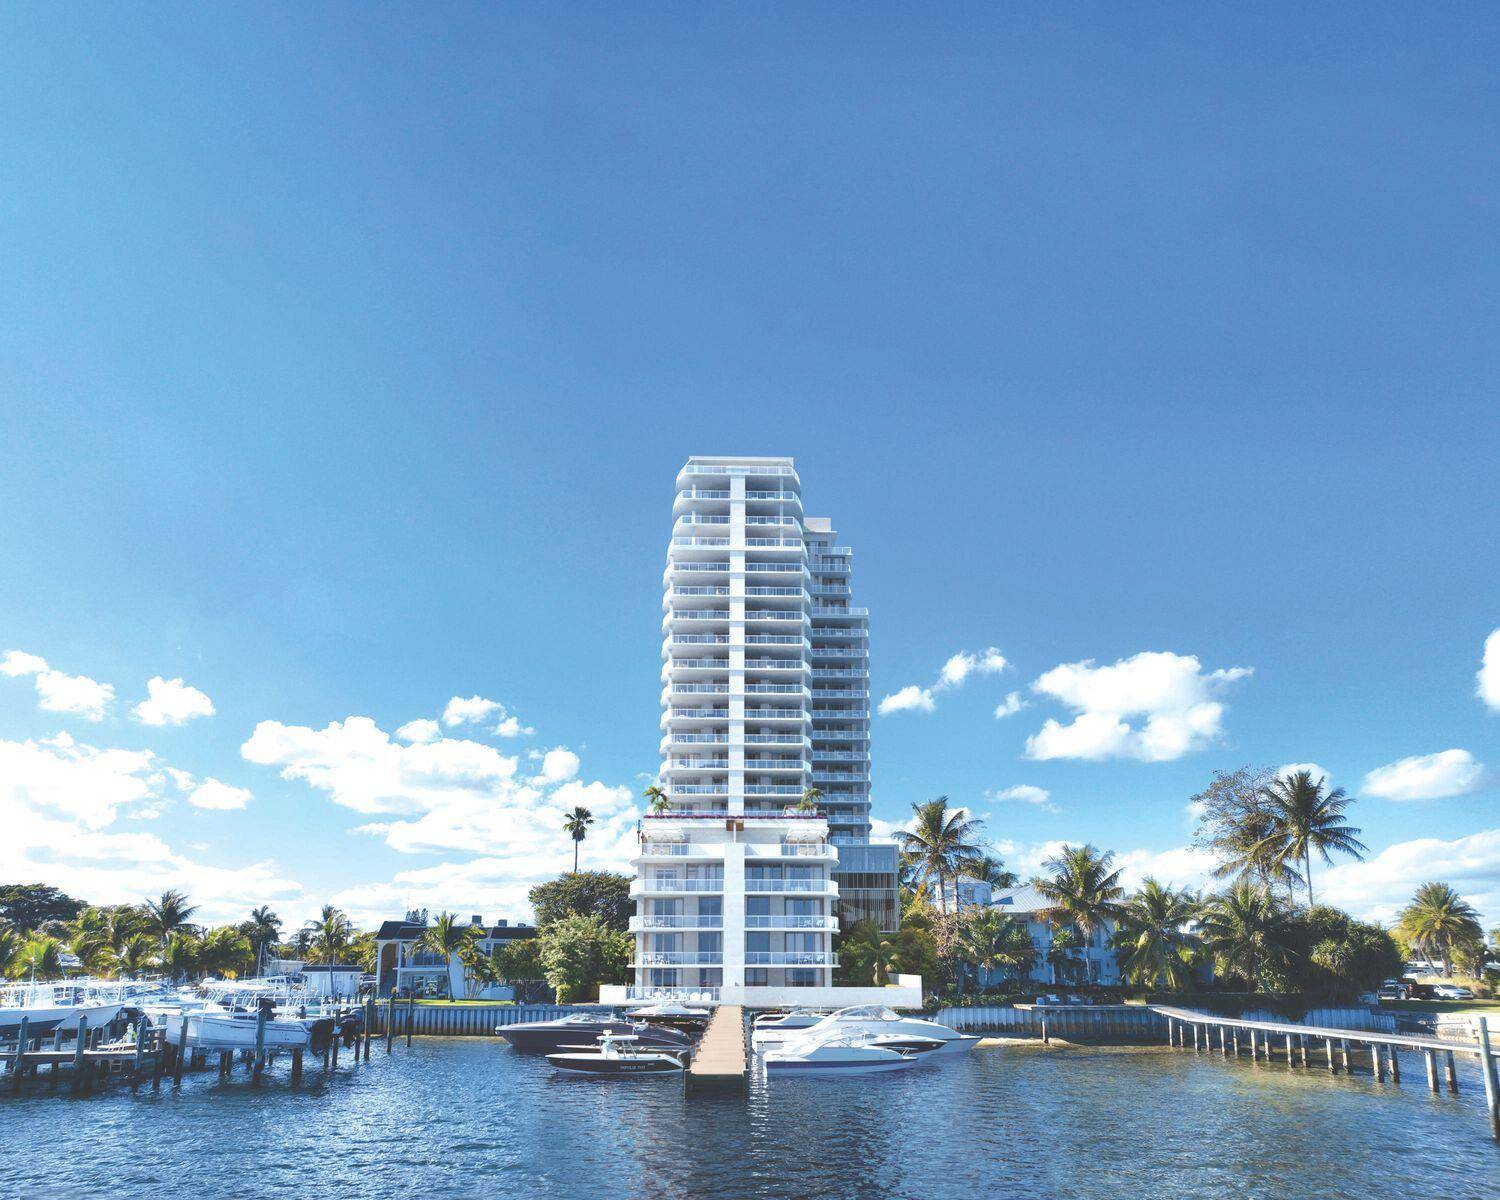 ntroducing Alba, an exquisite collection of 55 luxury residences, ranging from 2 to 4 bedrooms, within a 22 story boutique direct waterfront building.